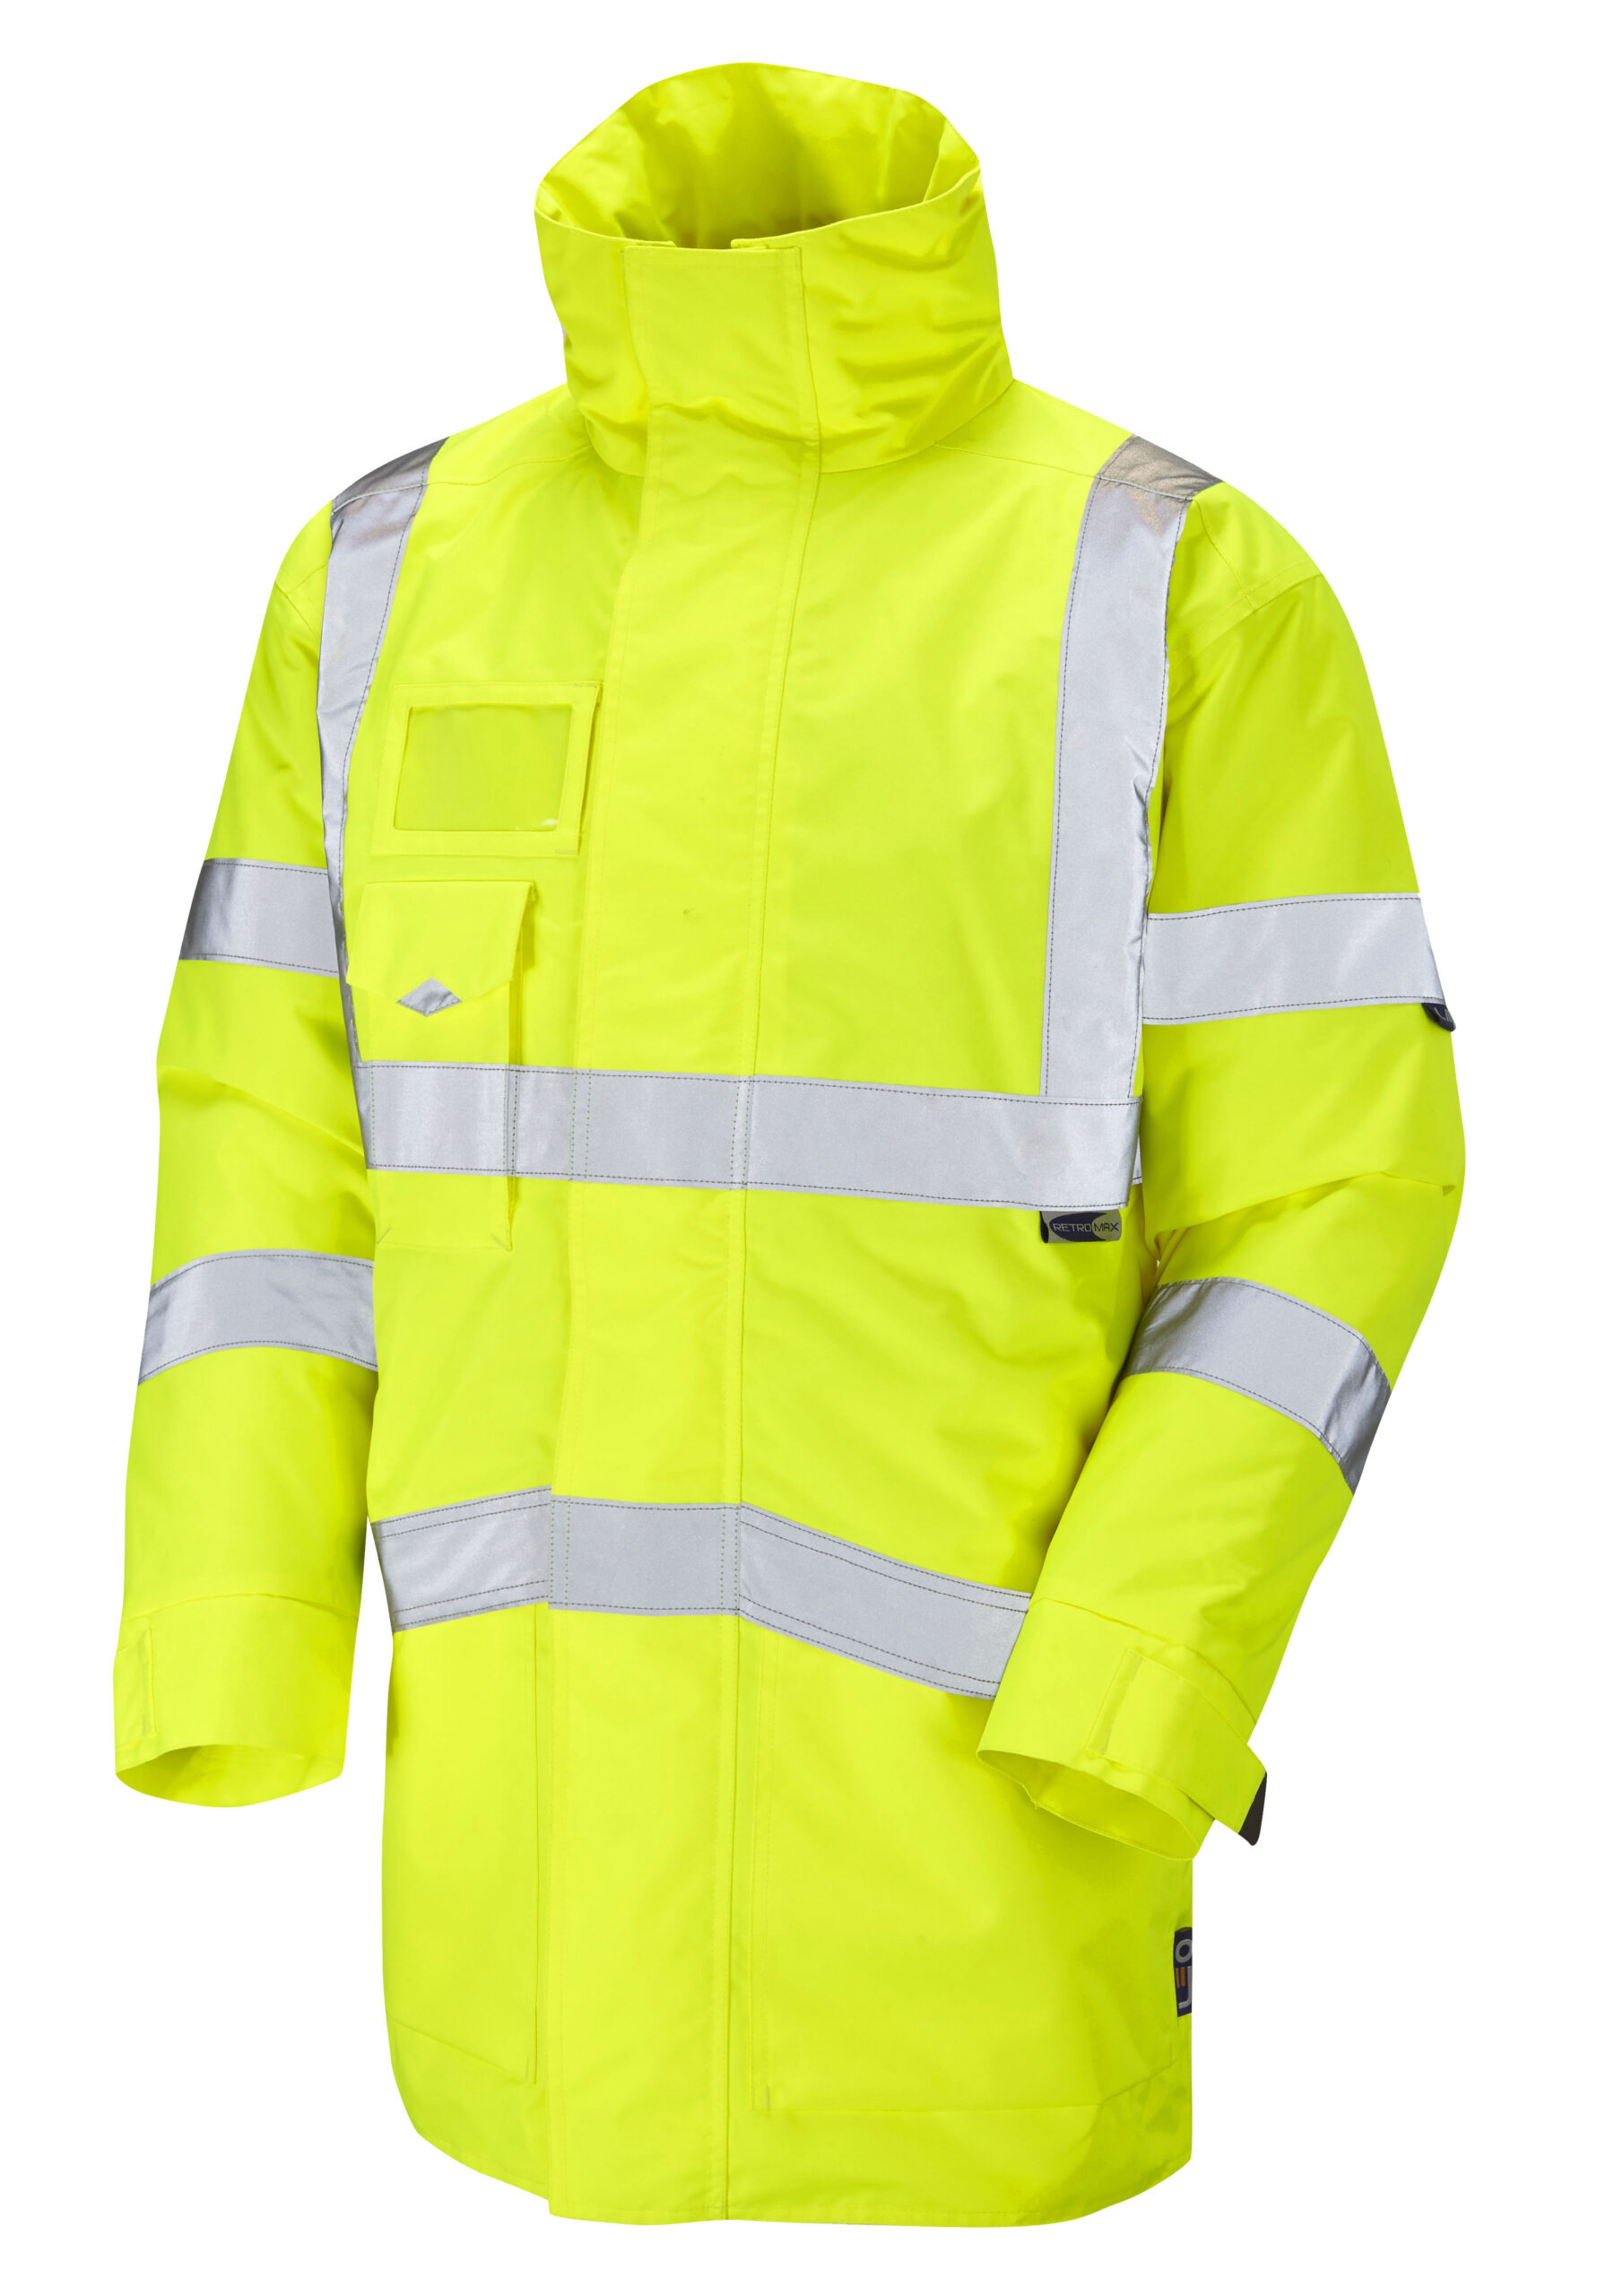 Marwood ISO 20471 Class 3 Superior Anorak | Concept Products Ltd